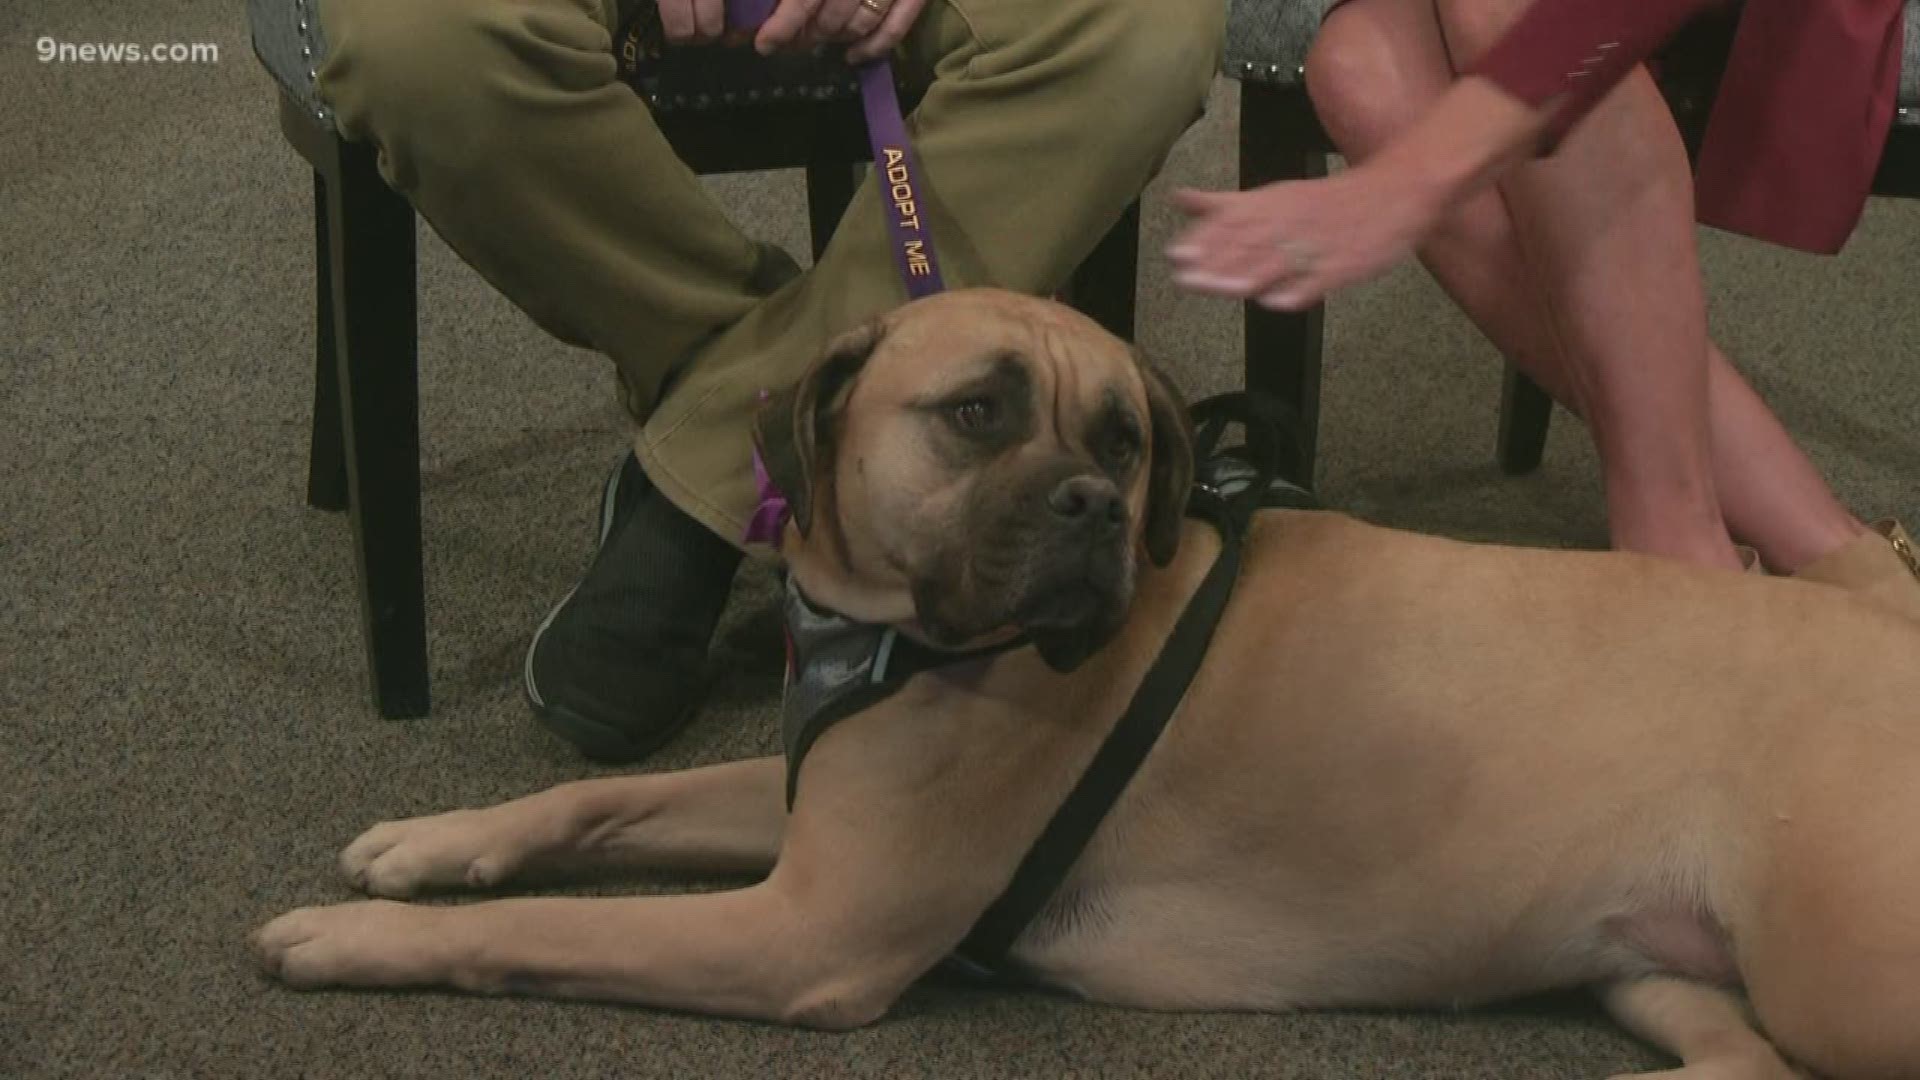 To adopt Adele, a 4-year-old bull mastiff, contact the Adams County Animal Shelter.